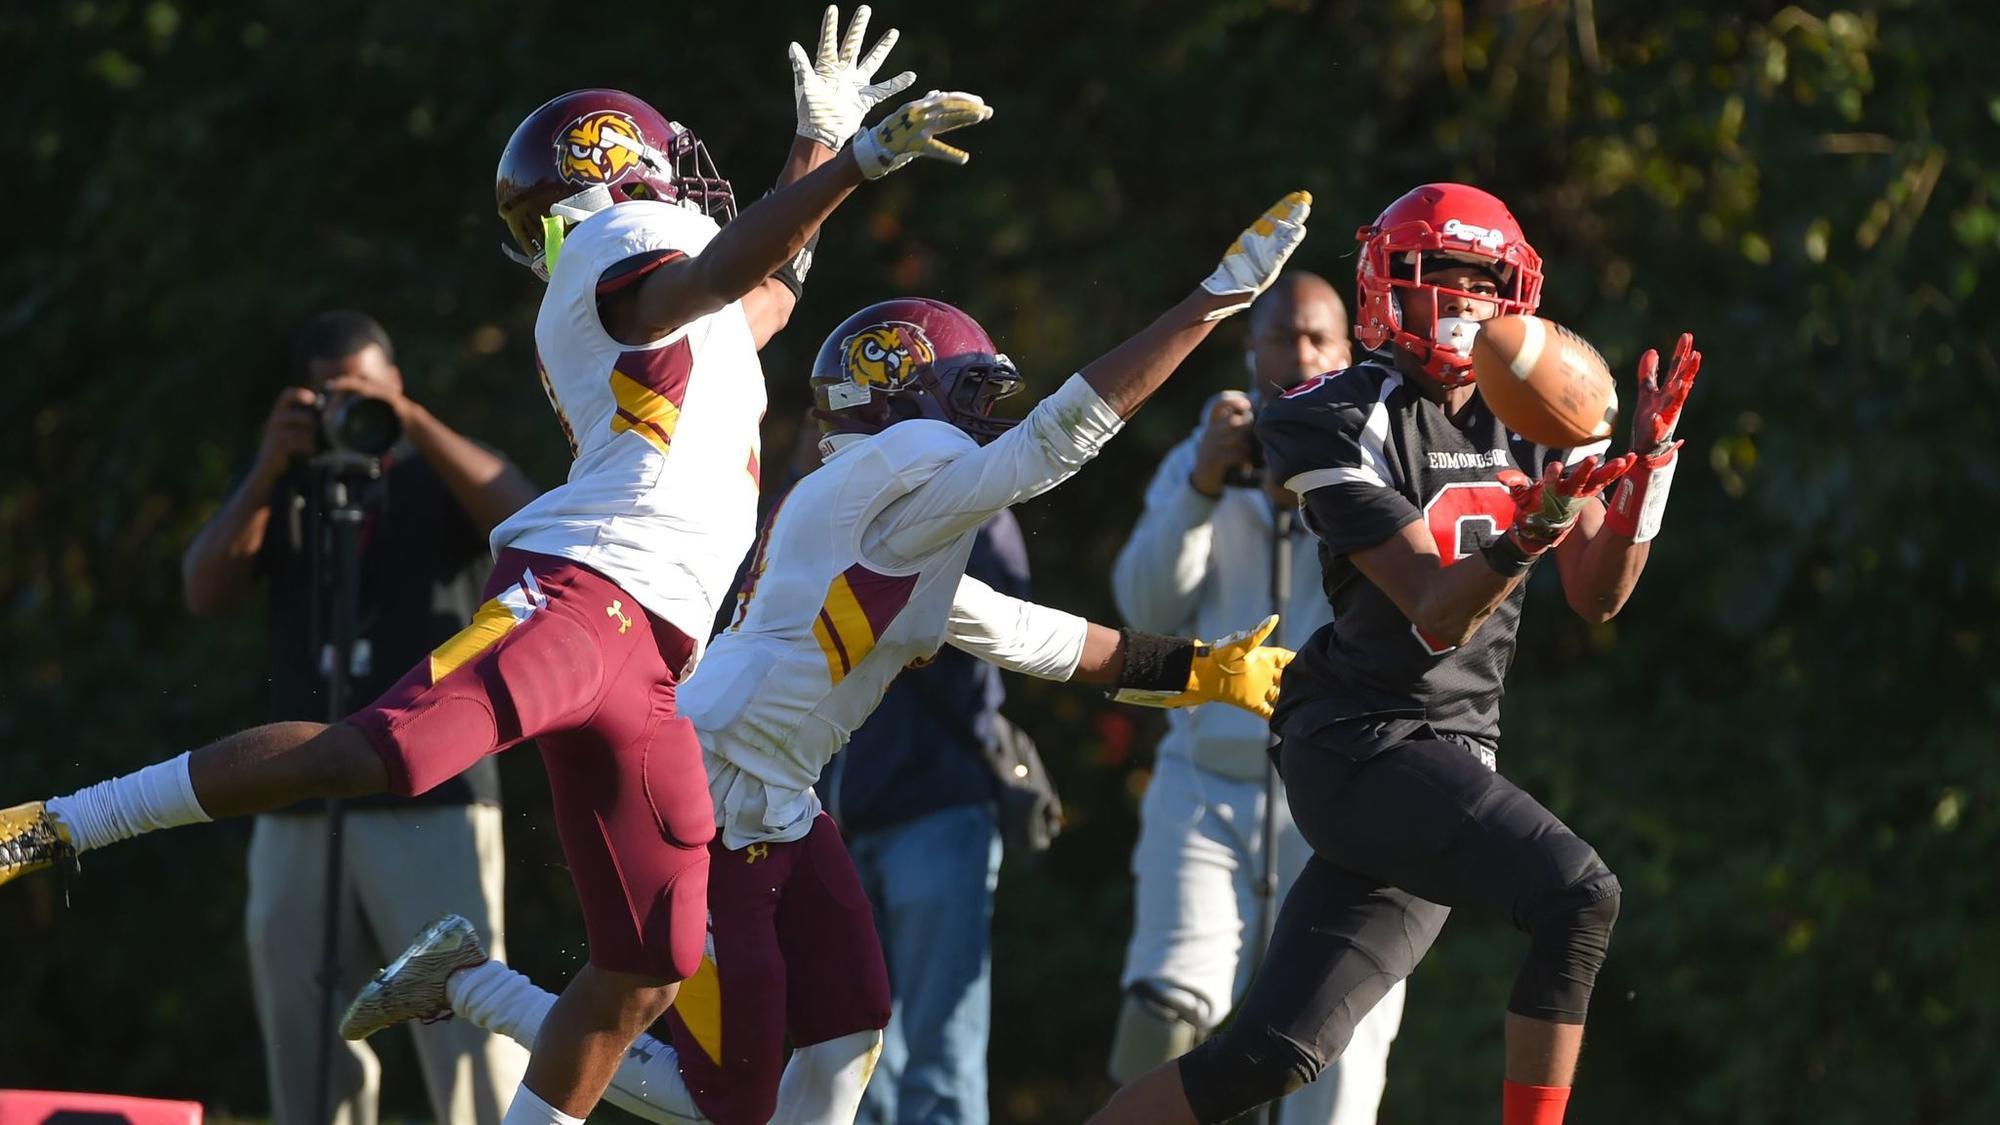 State, MIAA football playoff matchups set for next weekend Baltimore Sun